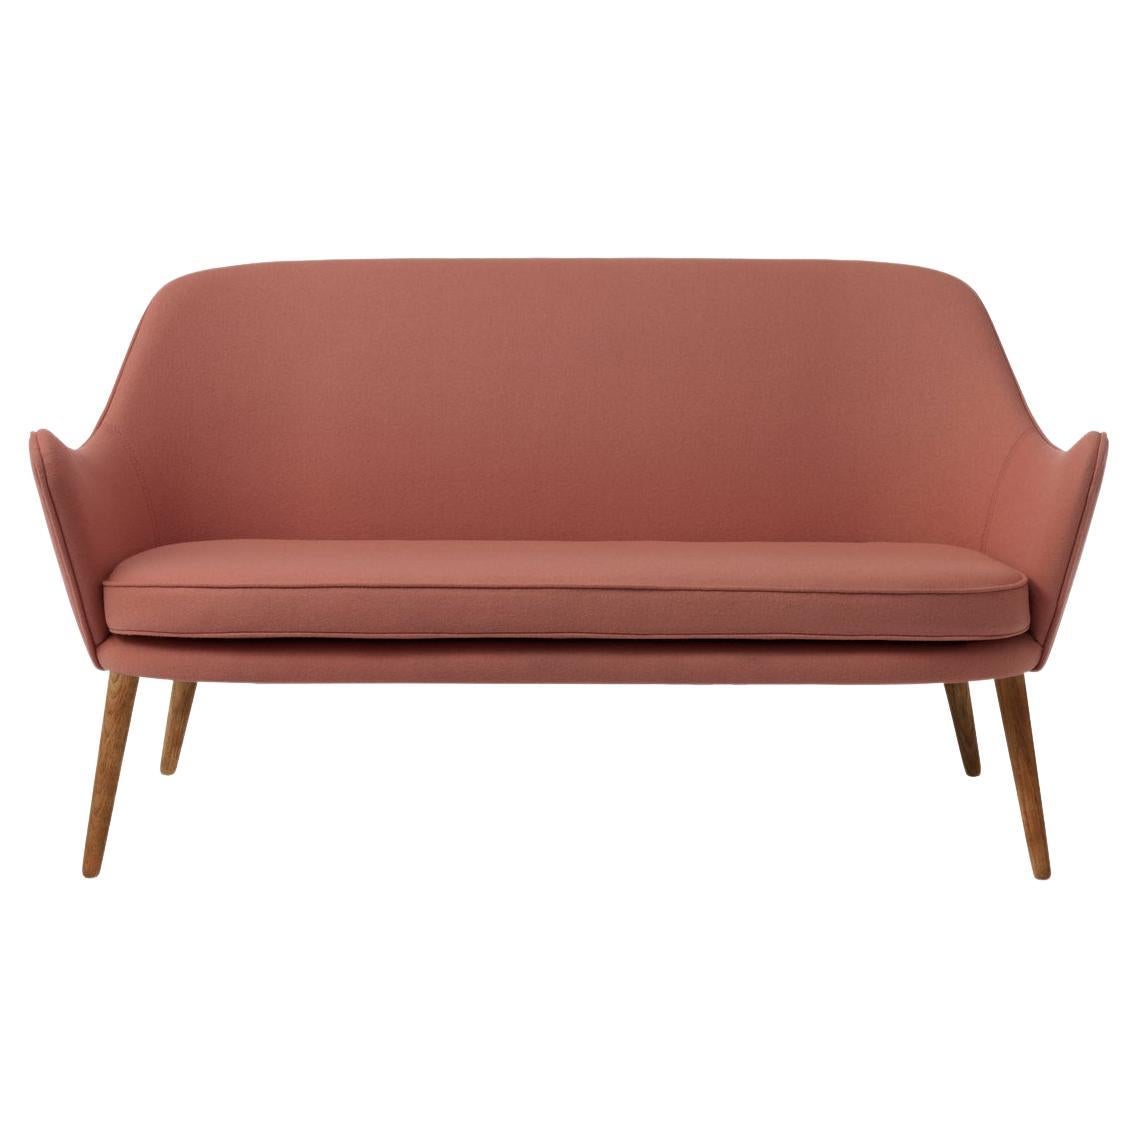 Customizable Dwell 2-Seat Sofa, by Hans Olsen from Warm Nordic For Sale at  1stDibs | dwell swivel chair, warm nordic sofa, dwell couch